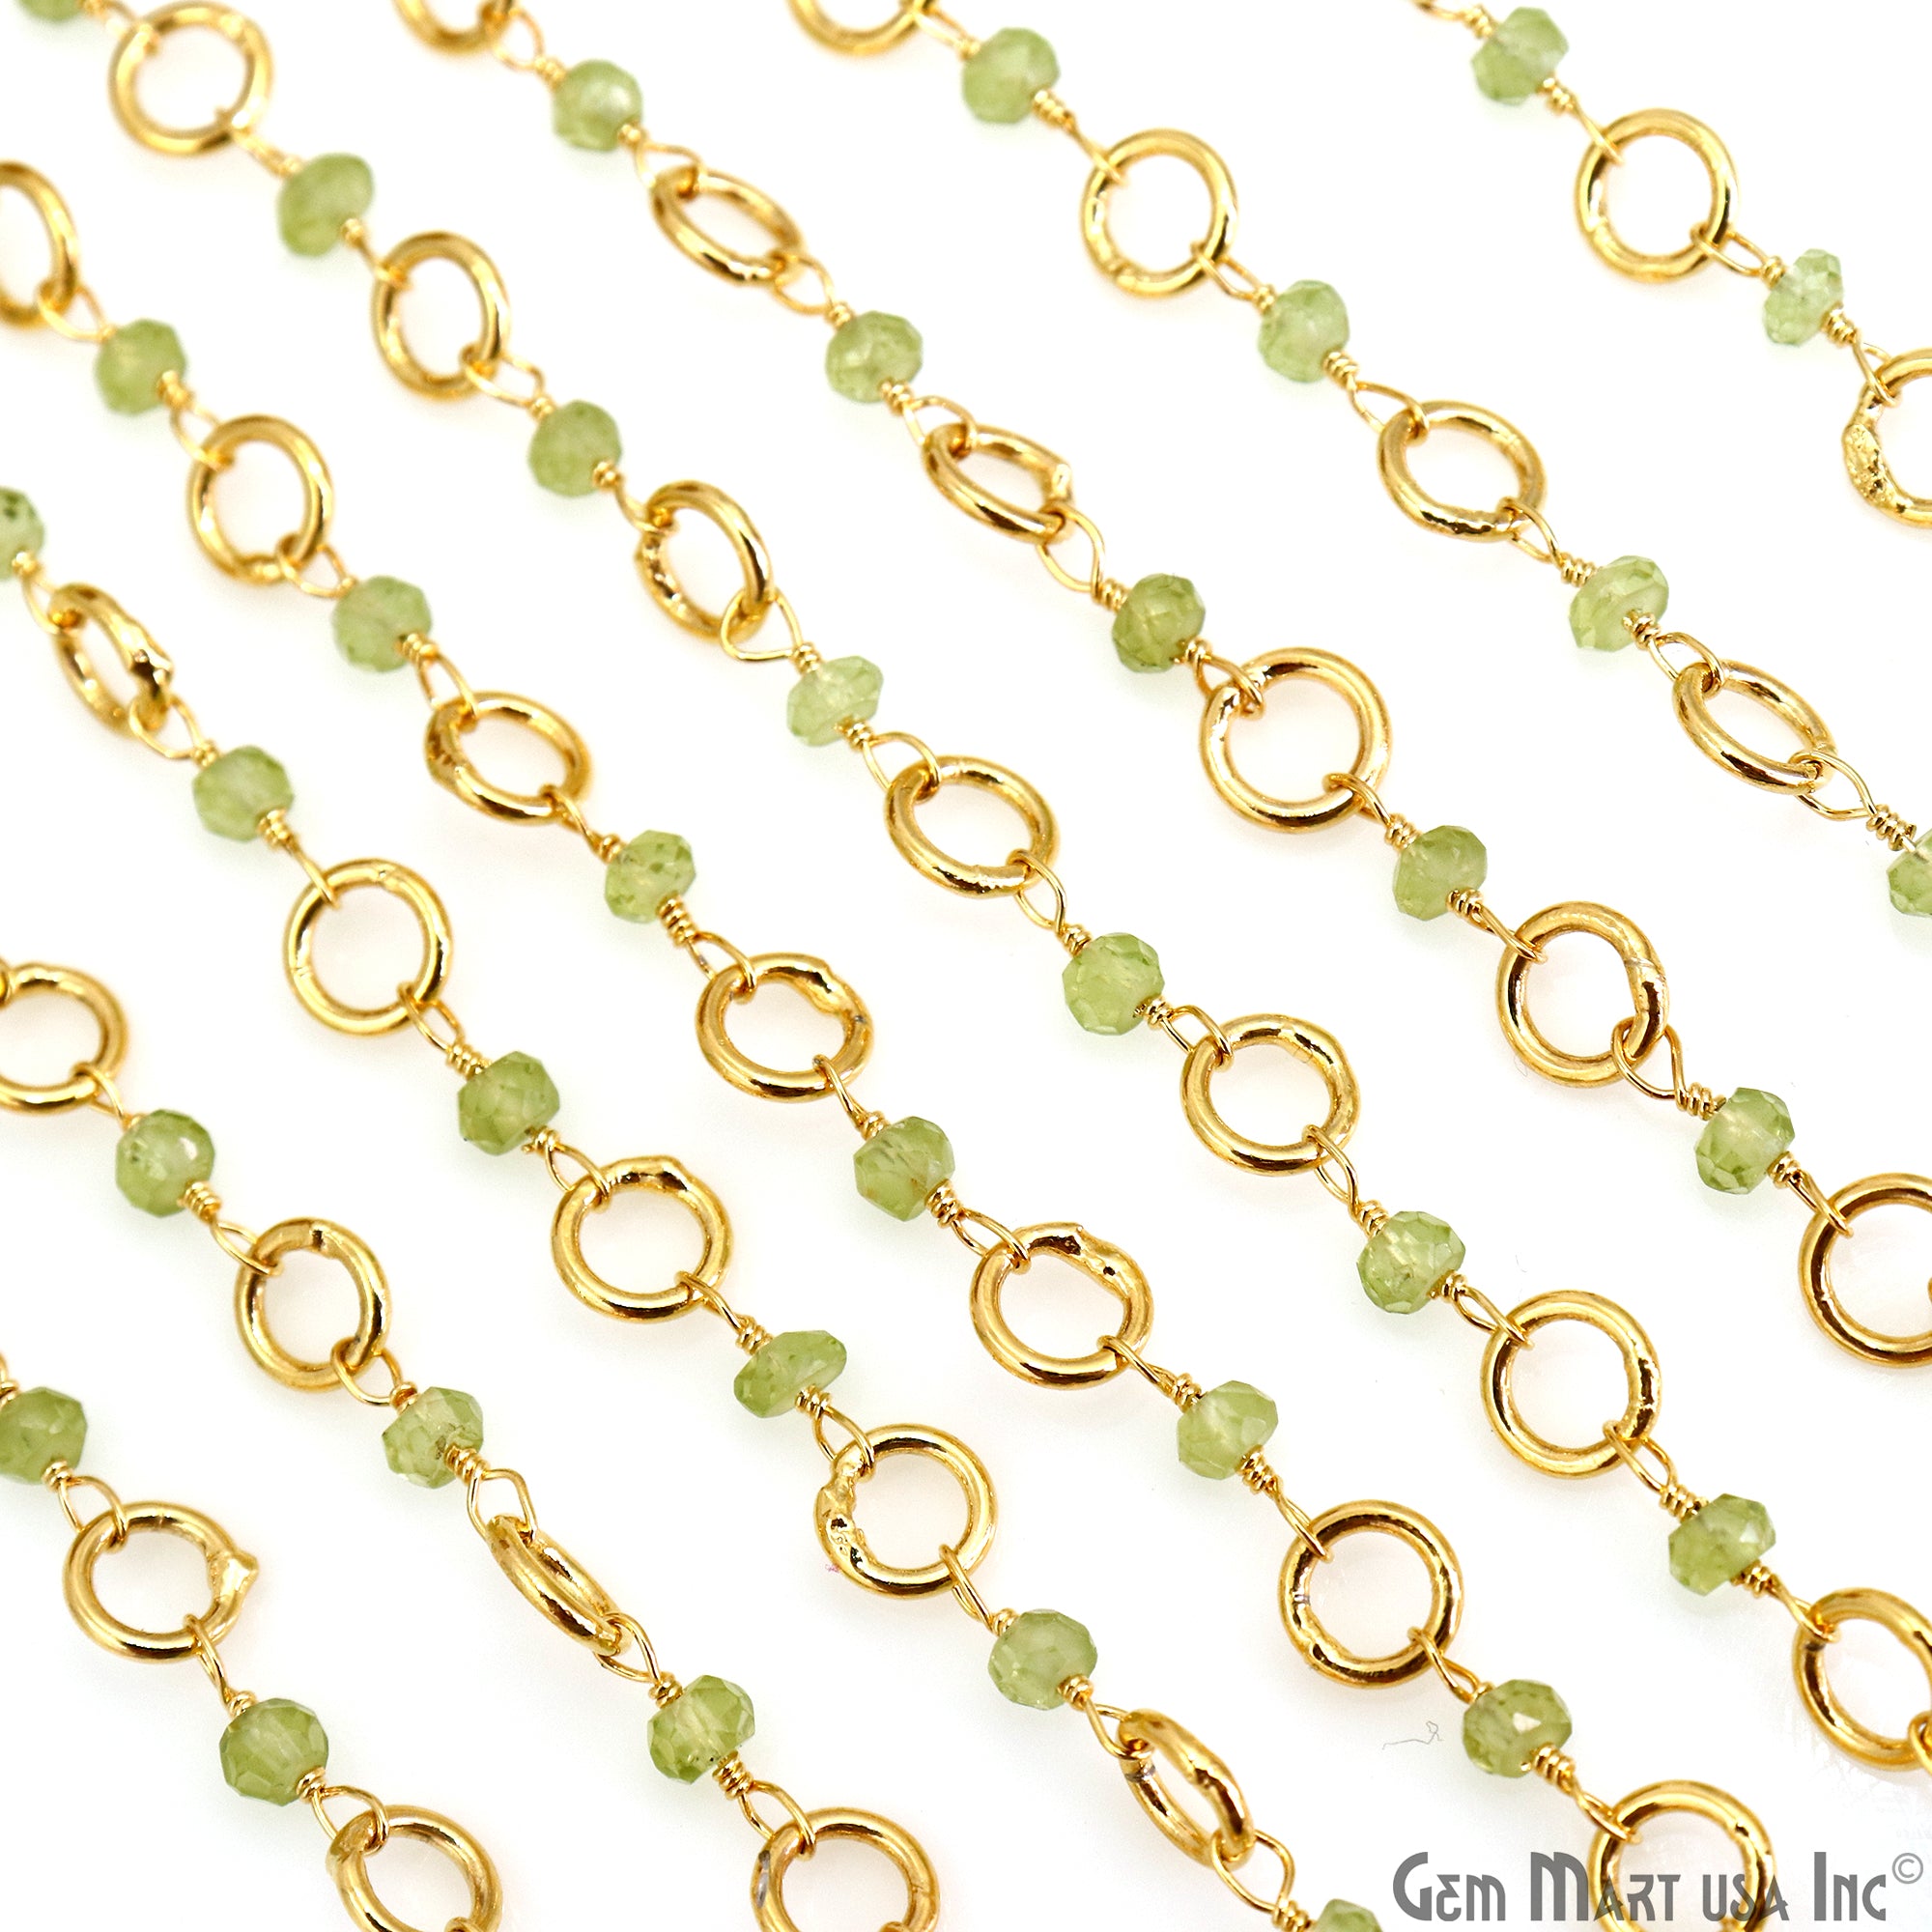 Peridot Beads 3-3.5mm Gold Plated 6mm Round Finding Rosary Chain